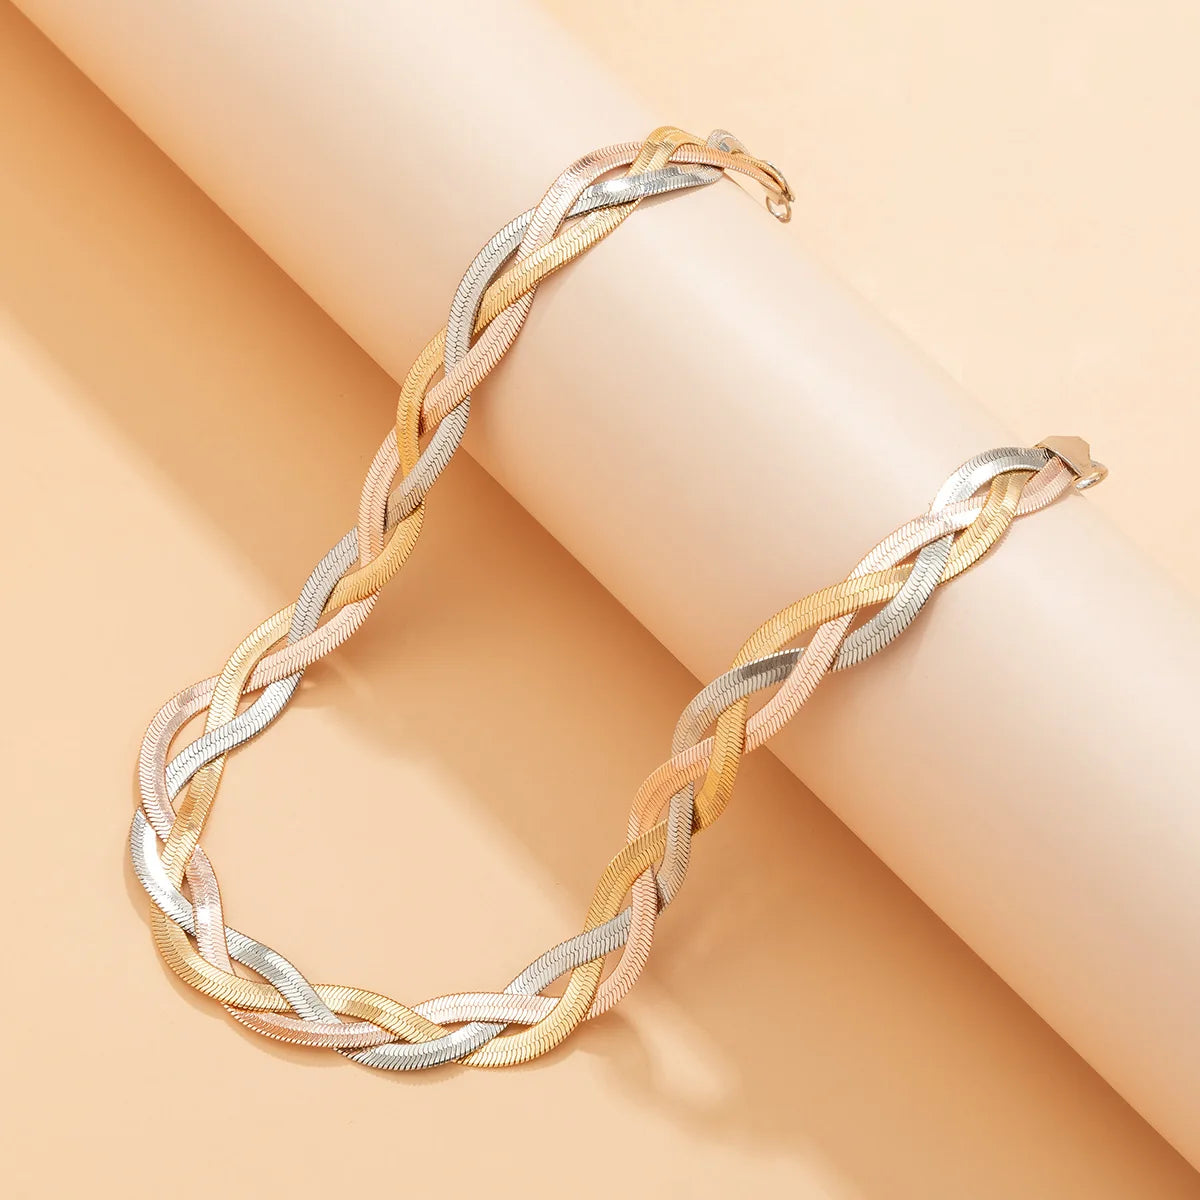 Boho Simple Twist Snake Chain Clavicle Necklace Women's Retro 2021 Fashion Metal Charm Color Necklaces Girl Jewelry Couple Gift